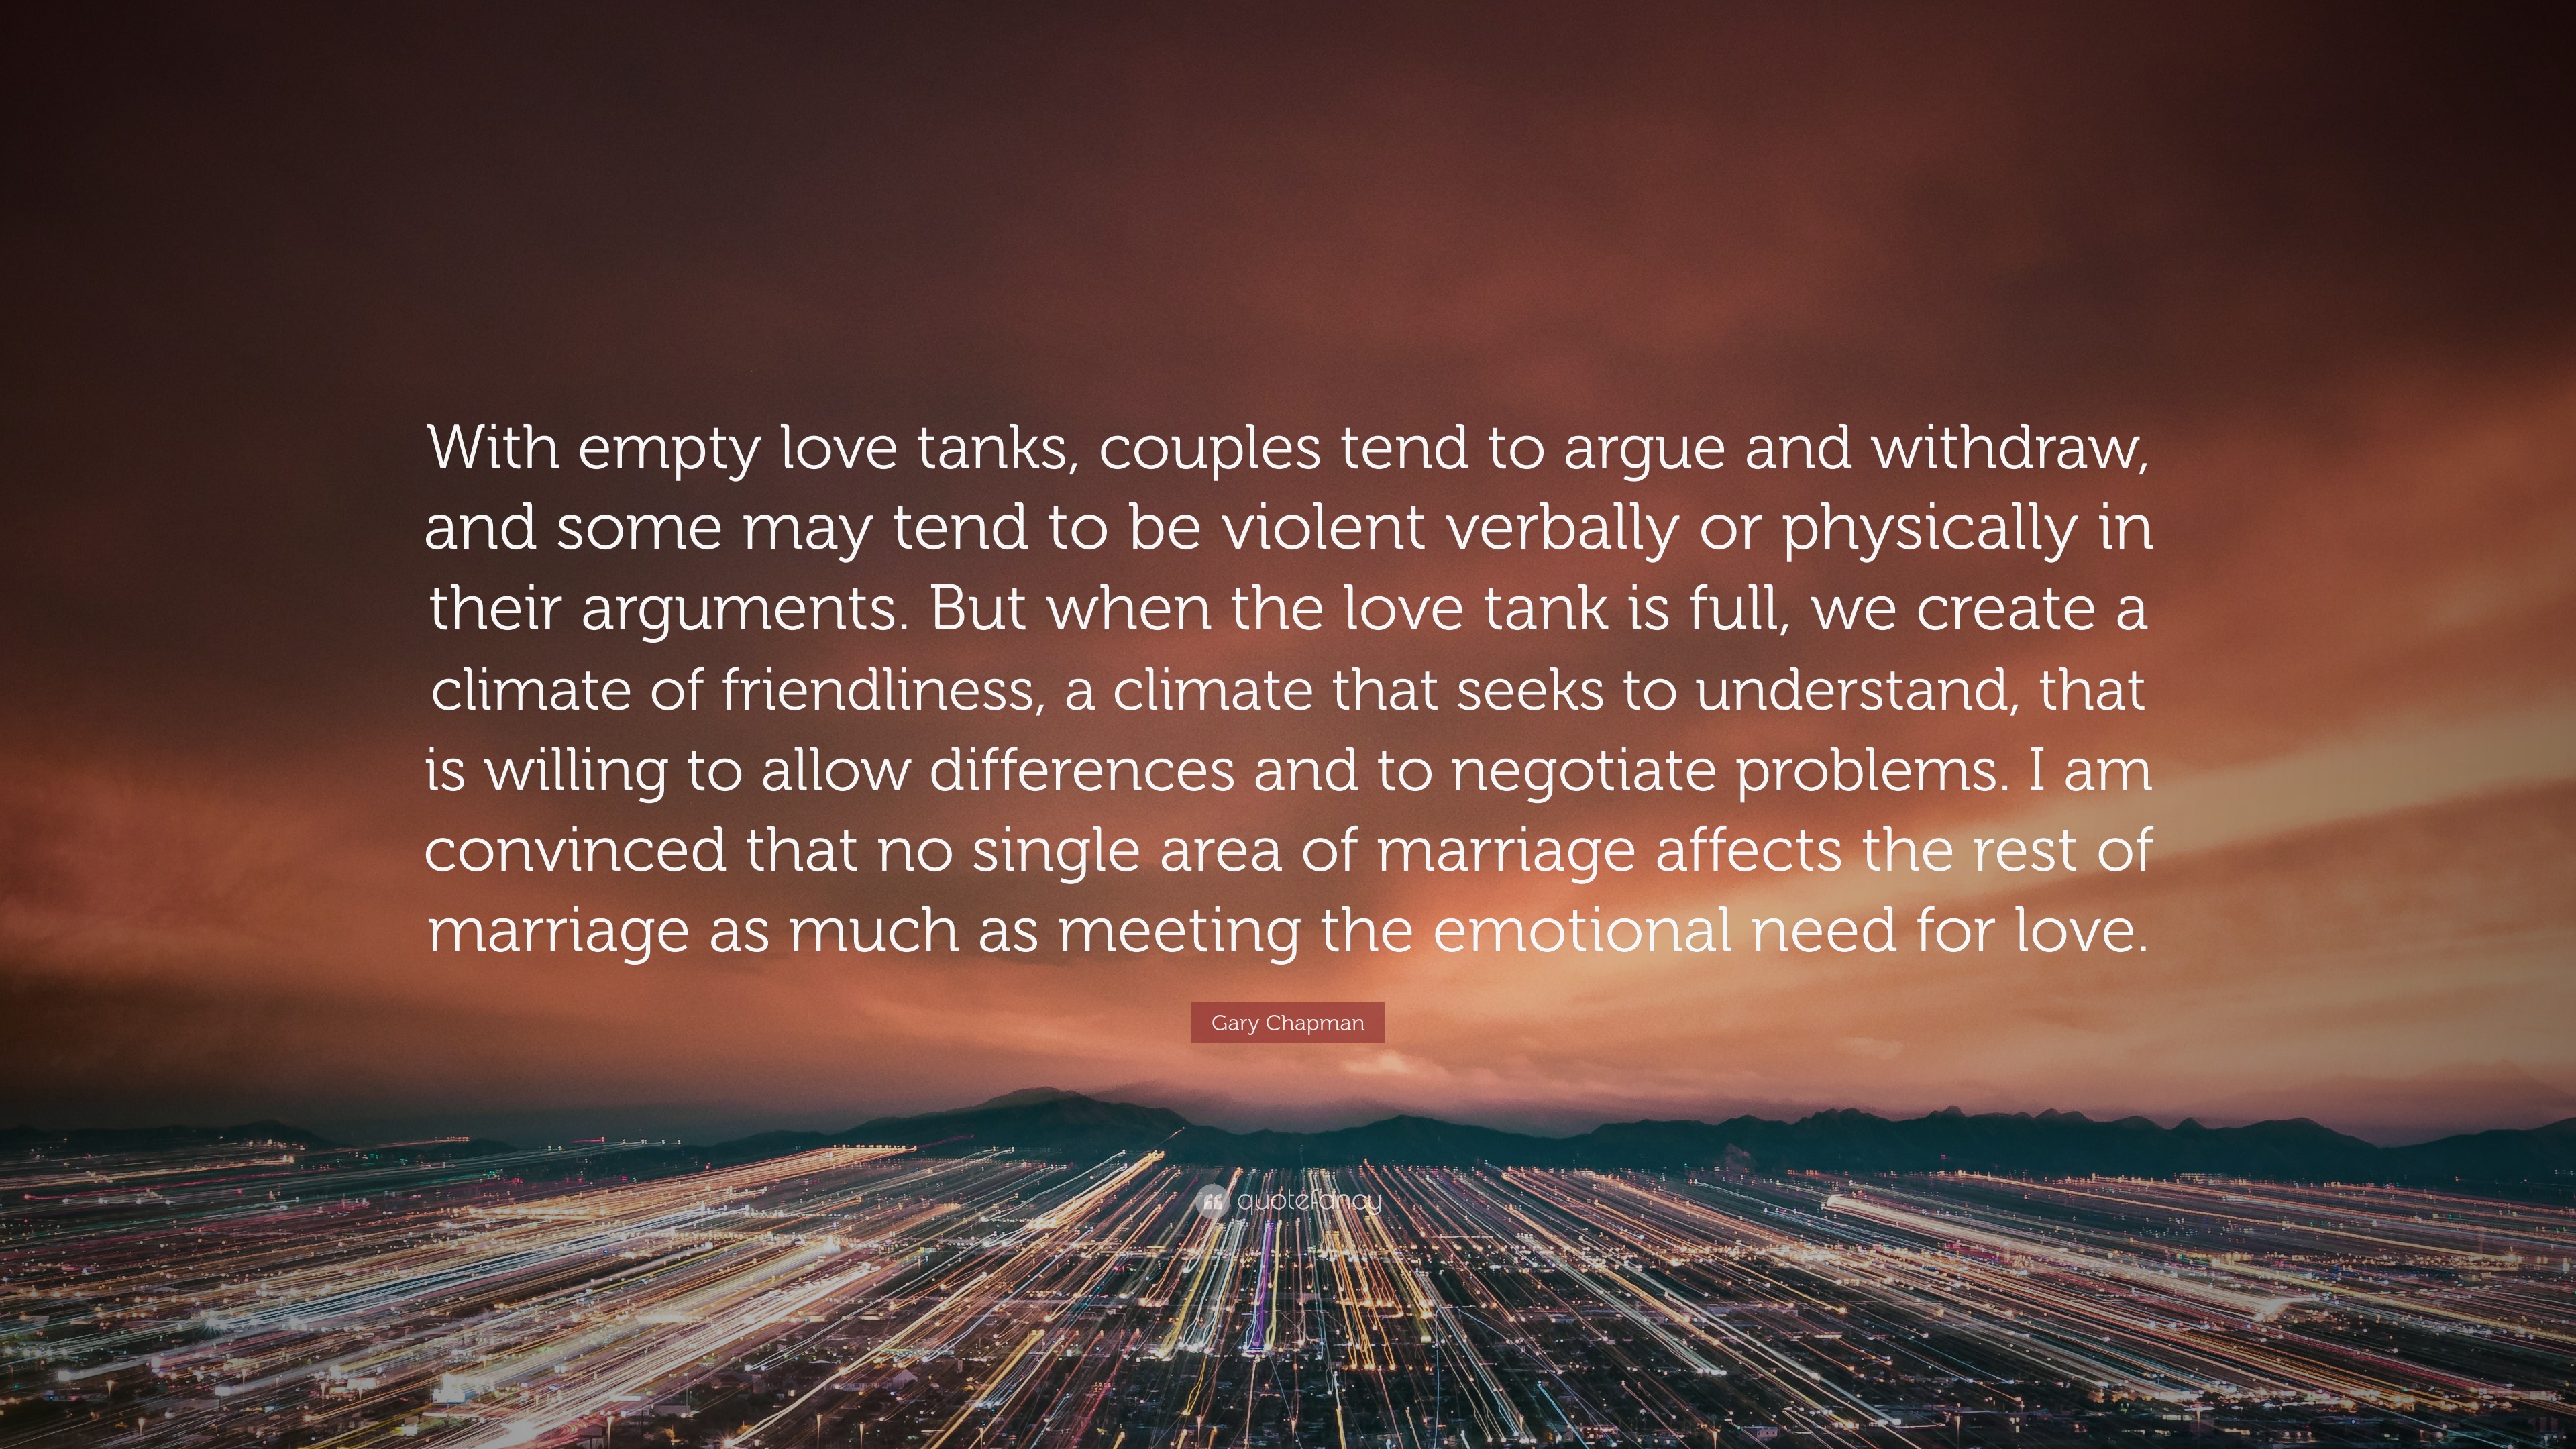 Gary Chapman Quote: “With empty love tanks, couples tend to argue and  withdraw, and some may tend to be violent verbally or physically in the”